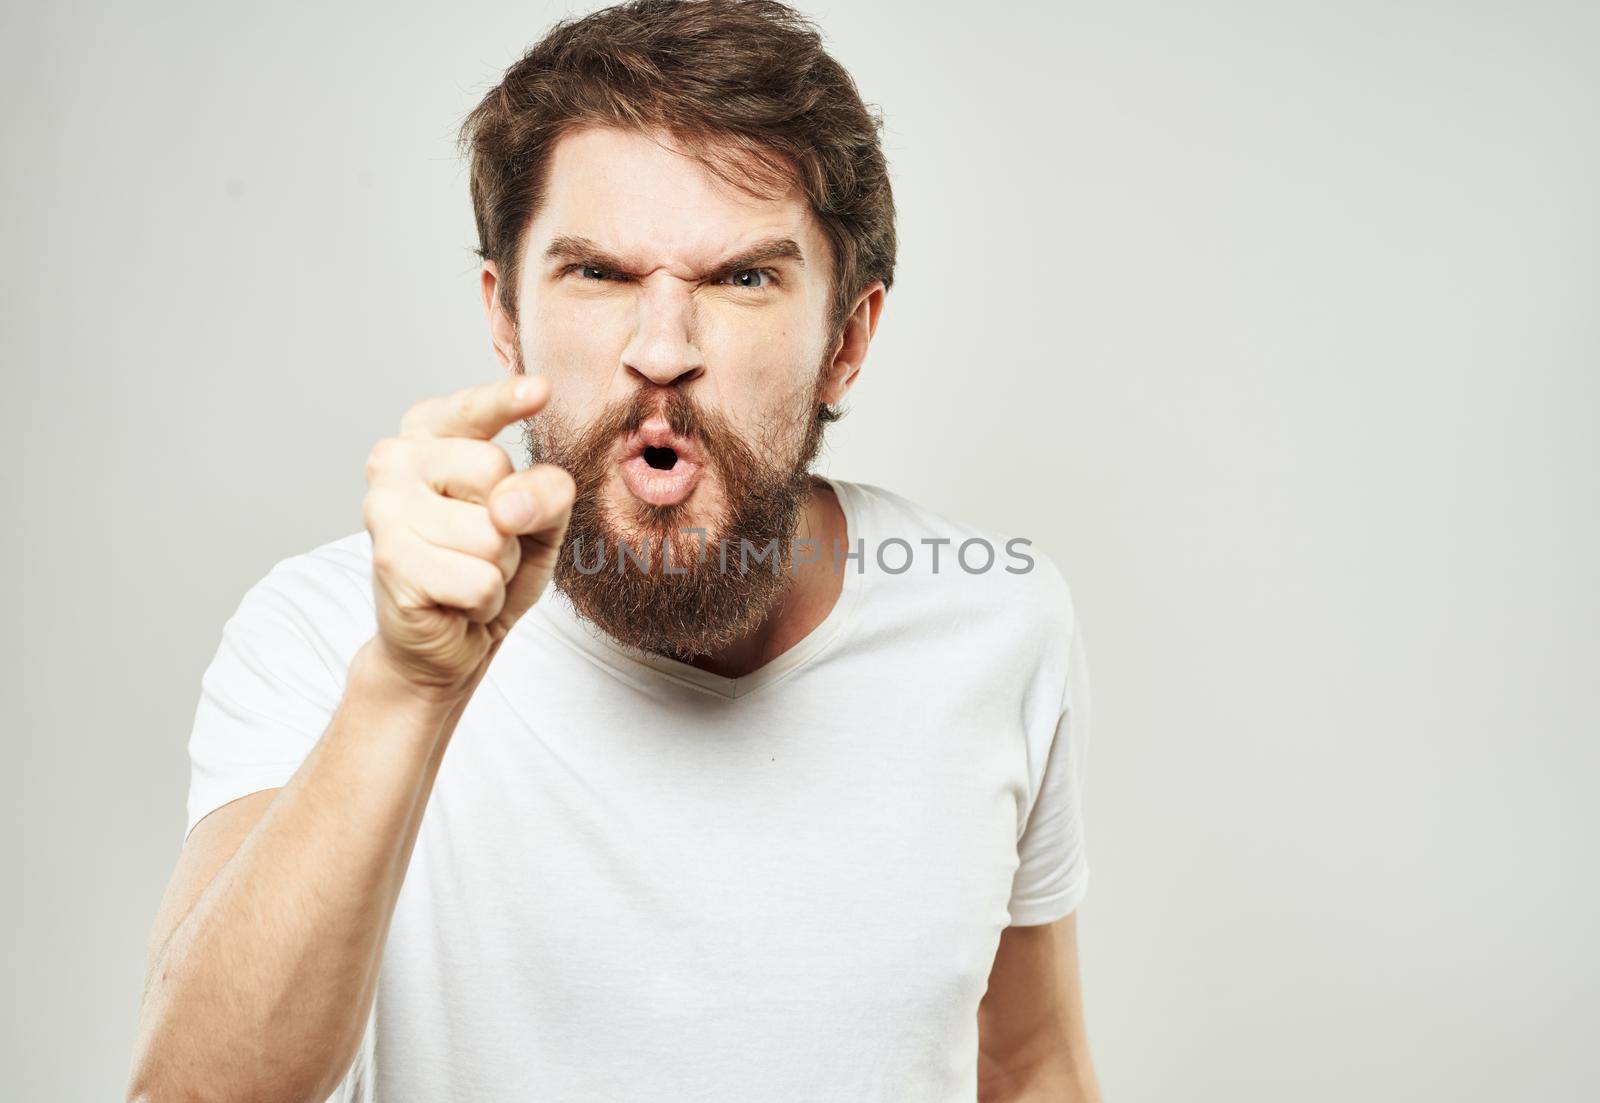 Aggressive man gestures with his hands on a light background stress emotions irritability by SHOTPRIME